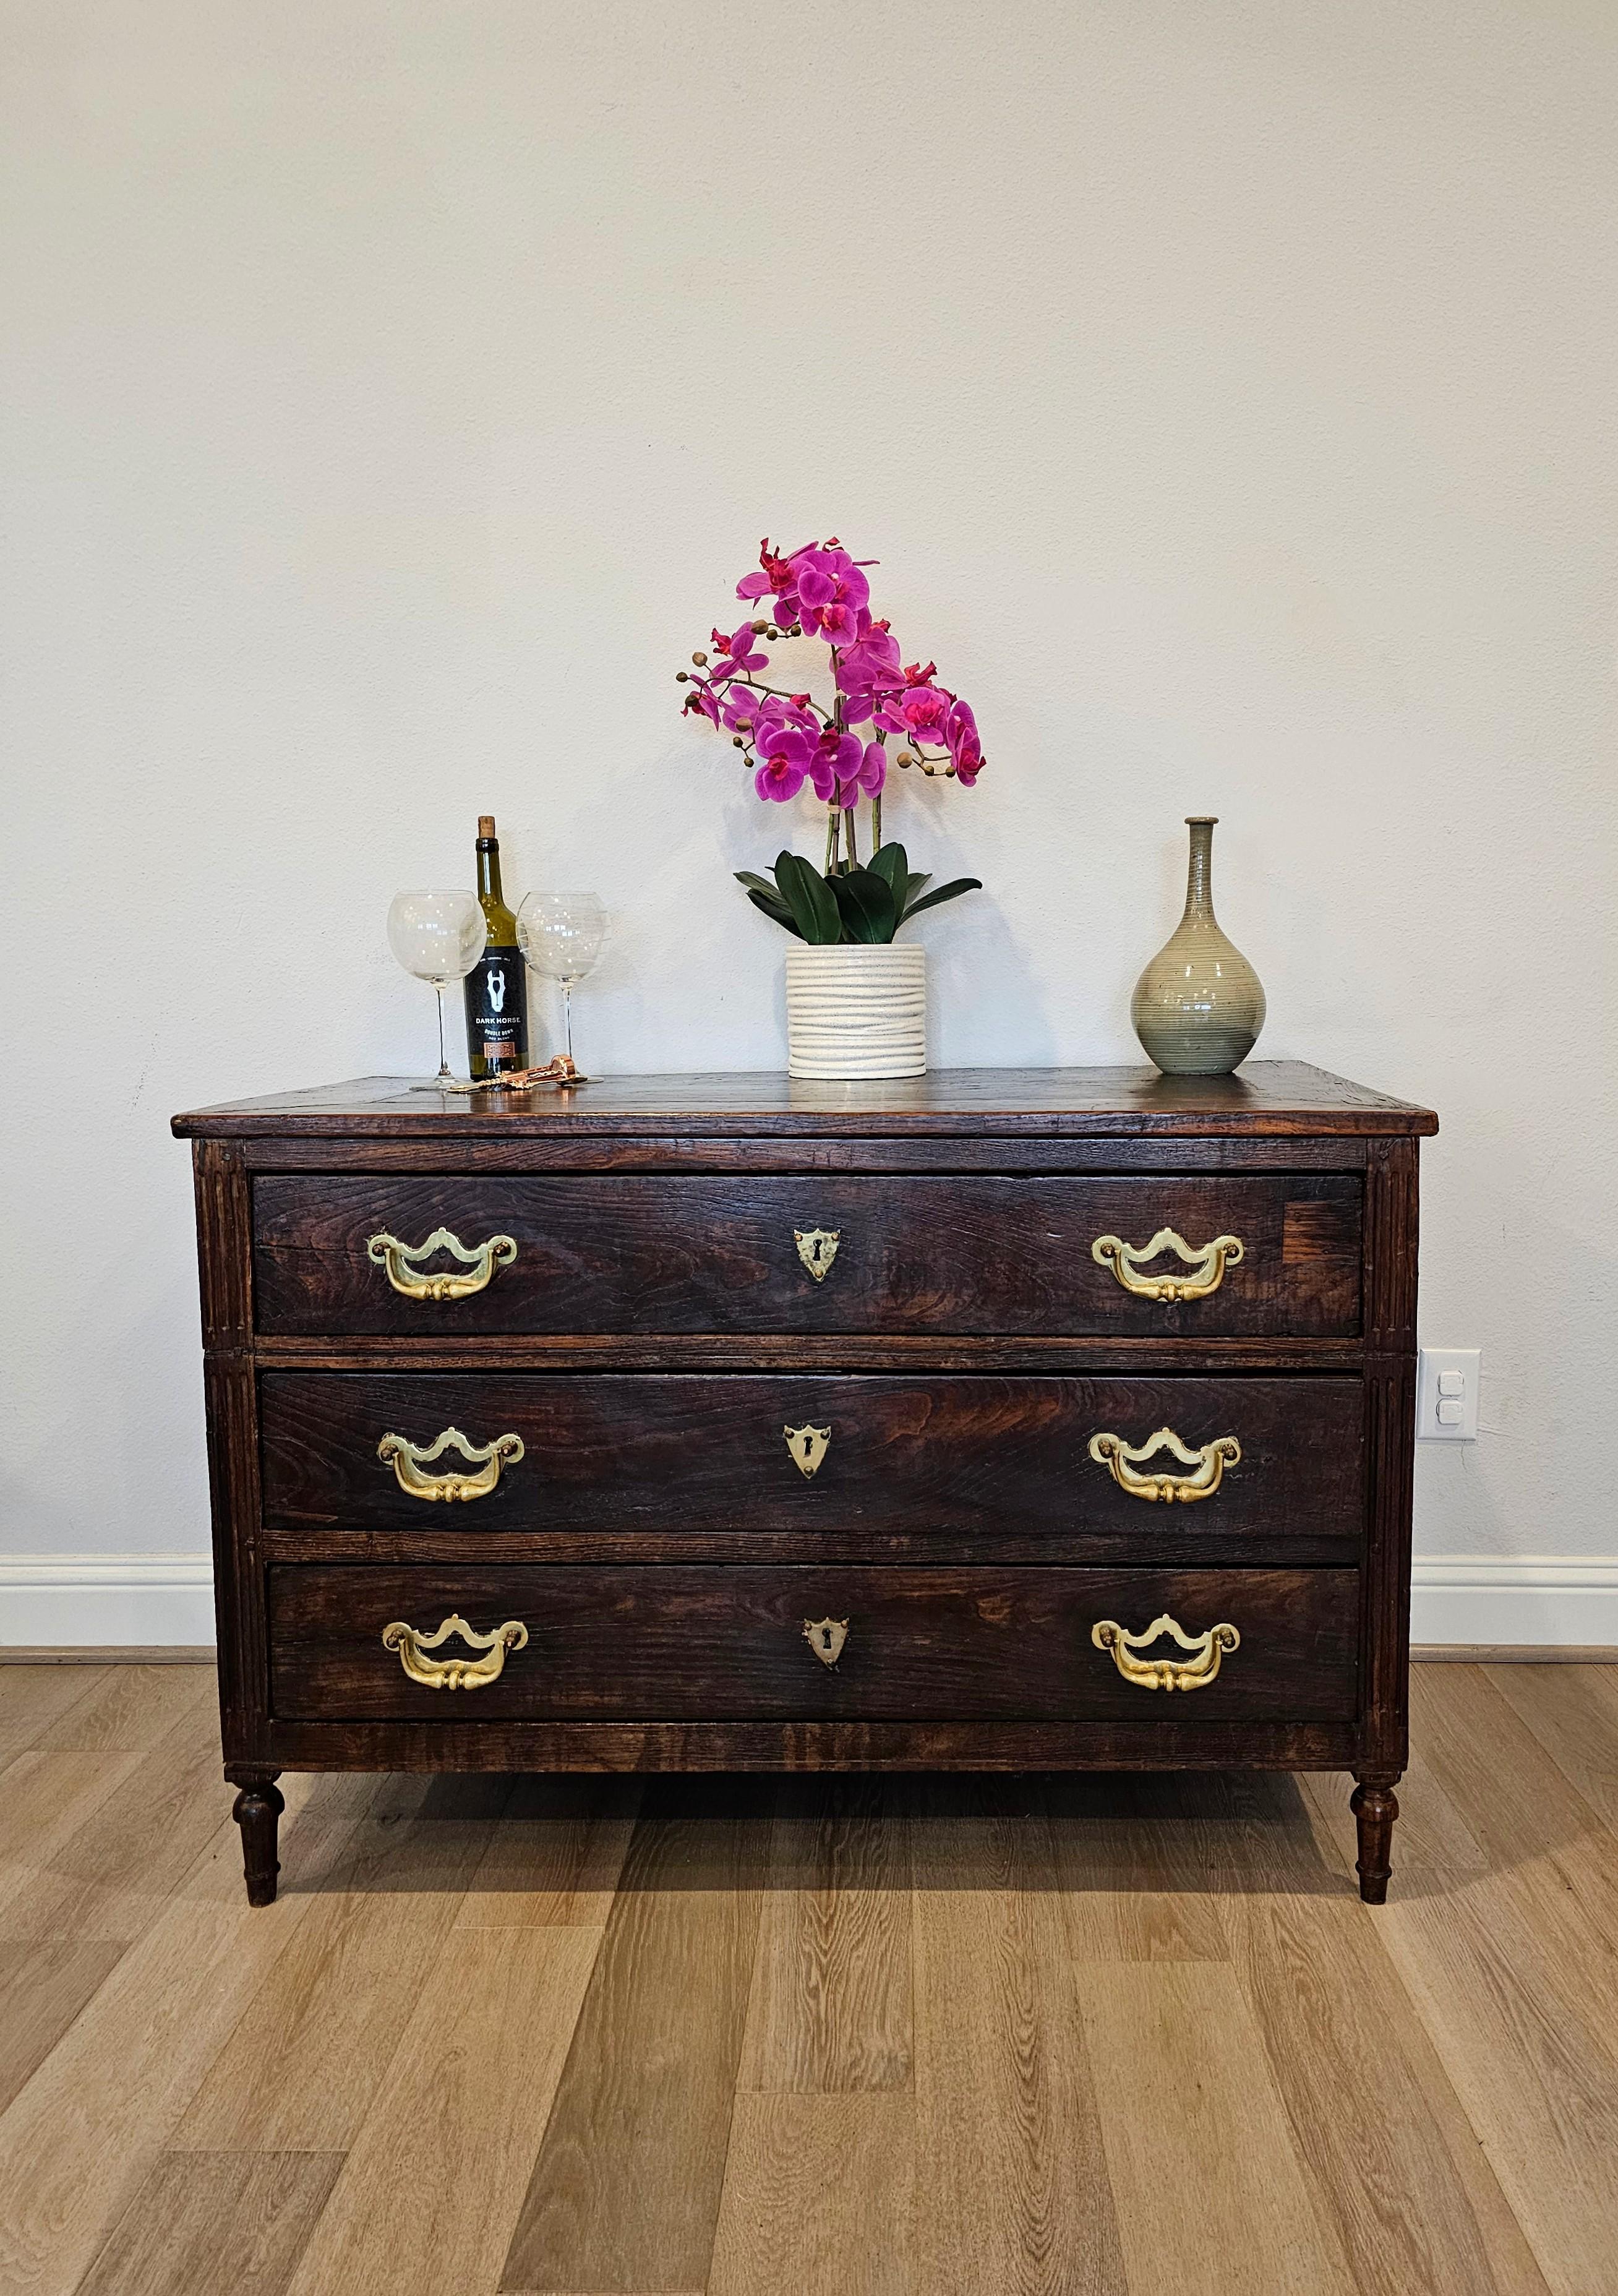 A handsome rustic antique Italian walnut chest of drawers commode. circa 1780

Hand-made in Italy in the second half of the 18th century, styled in Neoclassical inspired Louis XVI period taste, having a rectangular boarded top, over solid wood case